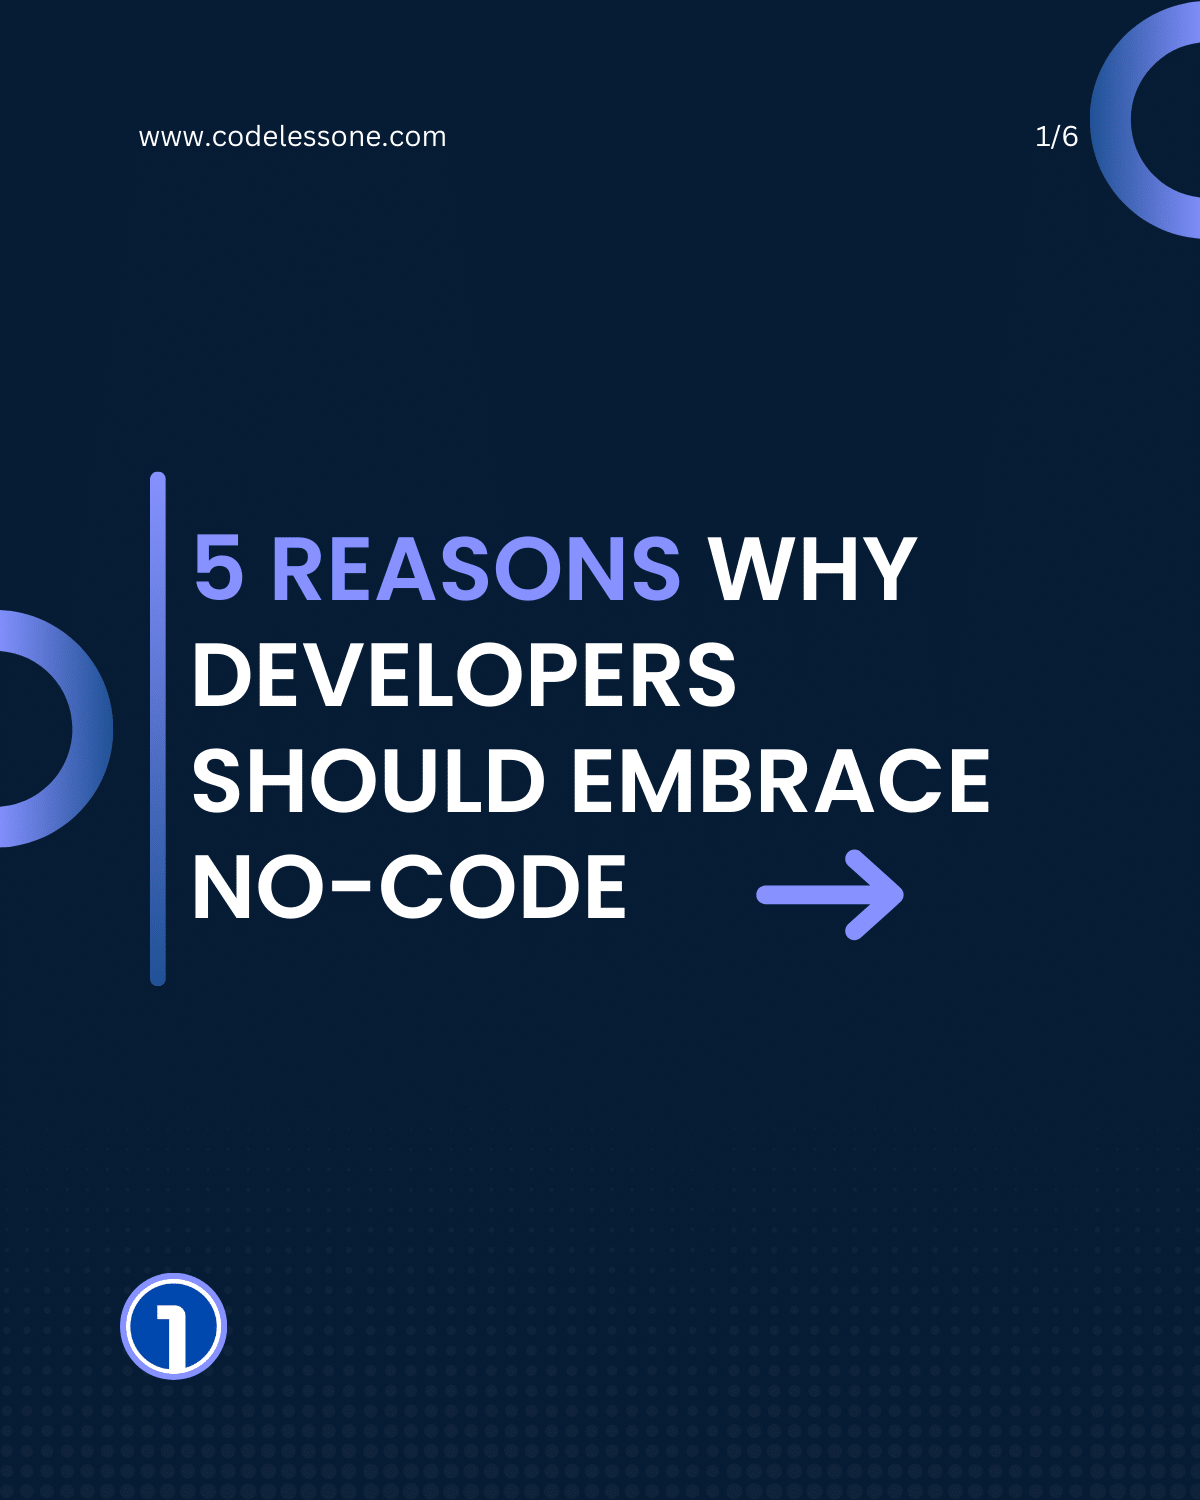 5 Reasons why developers should embrace no-code